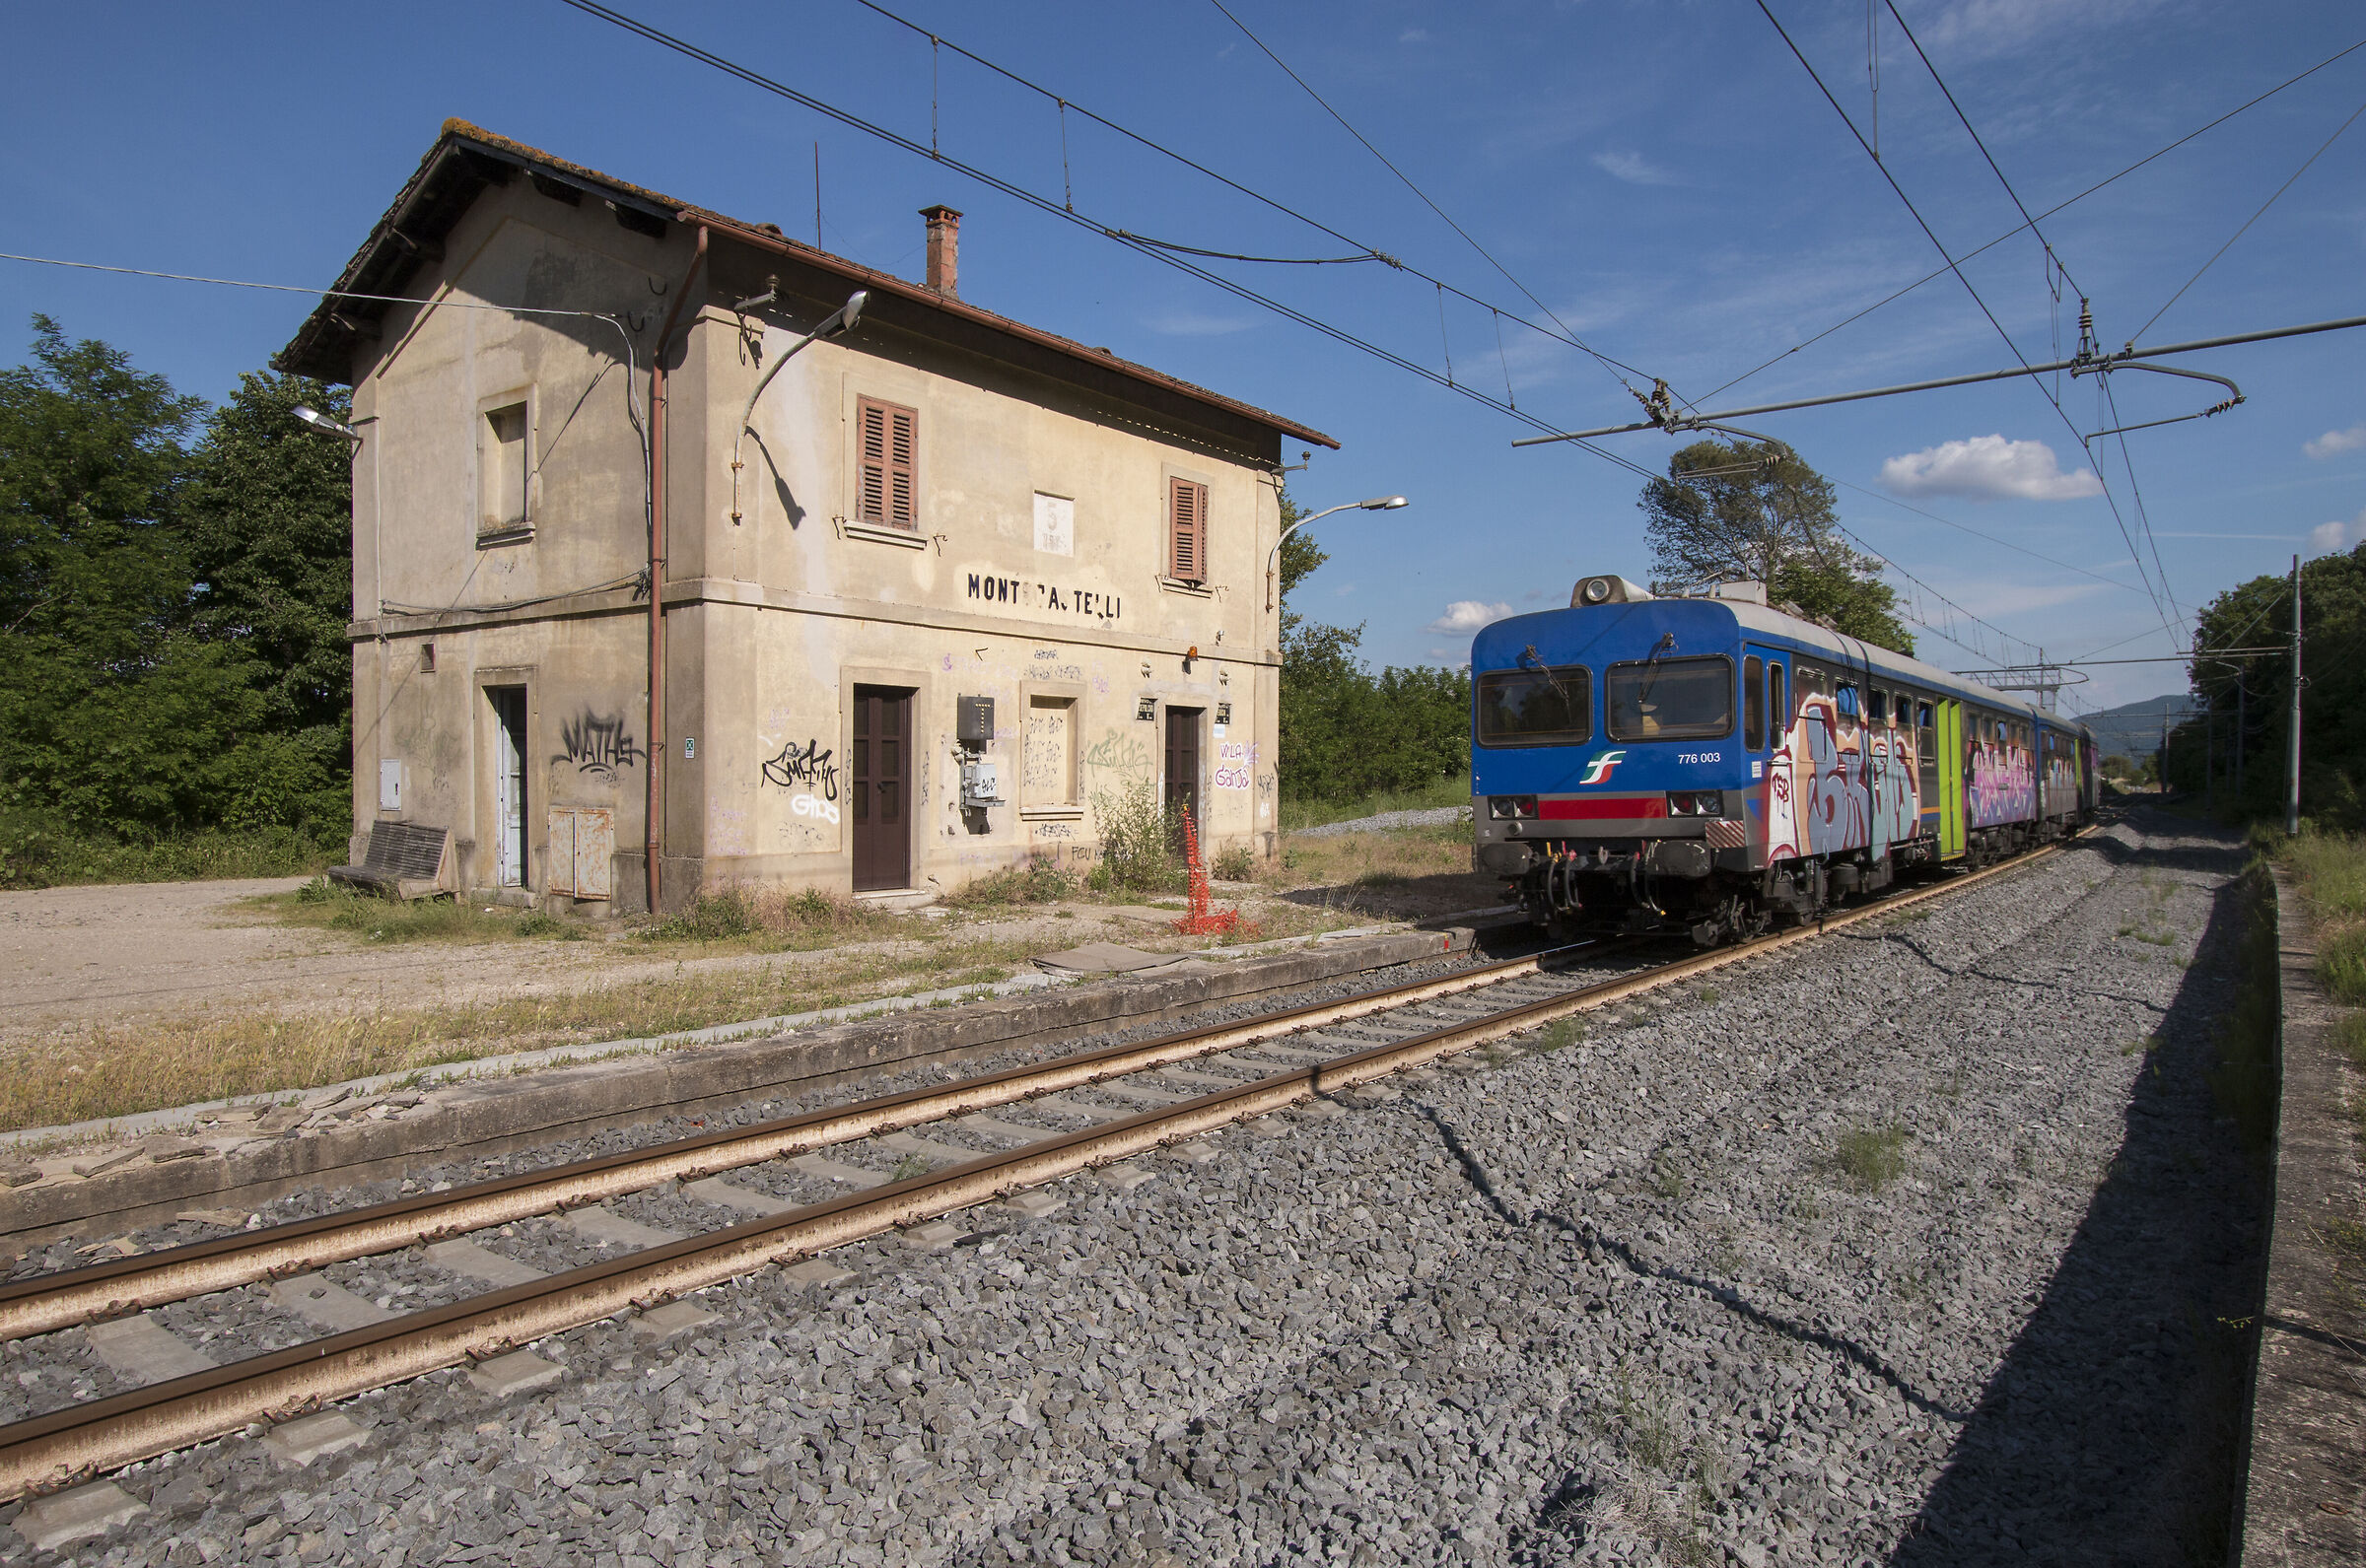 The old station of Montecastelli (PG) ...